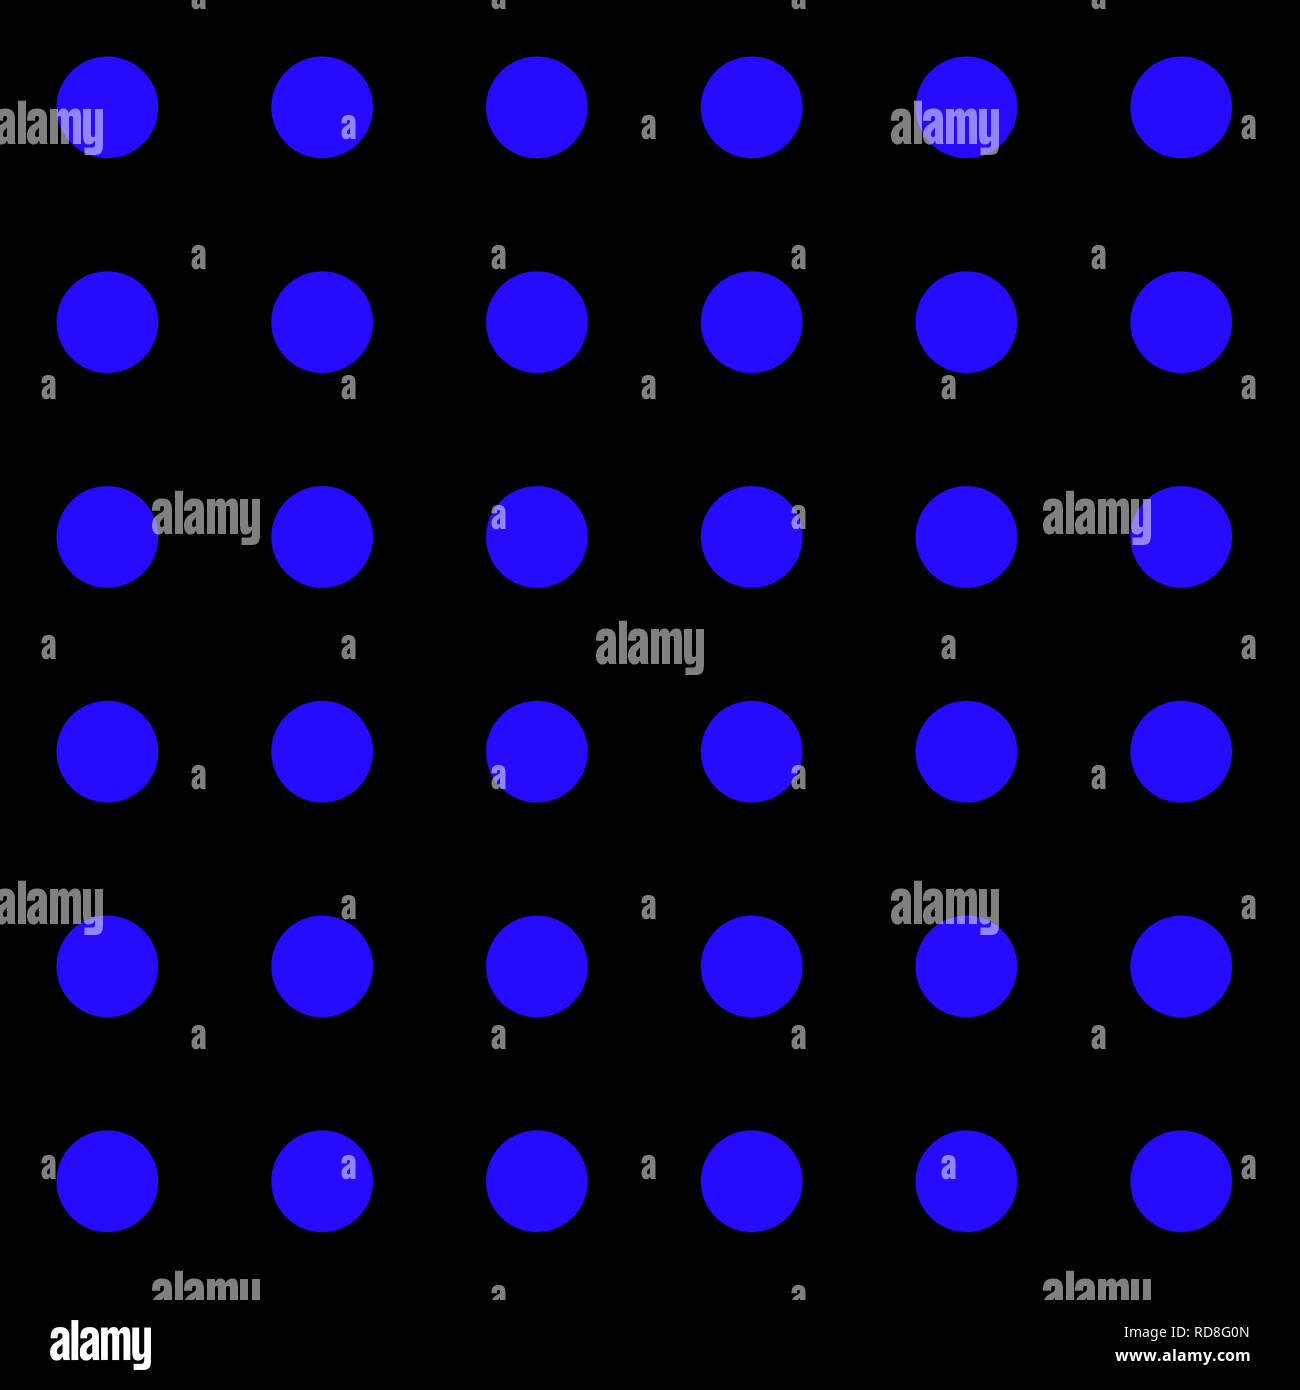 Seamless repeating pattern of big blue dots on a black background Stock Photo